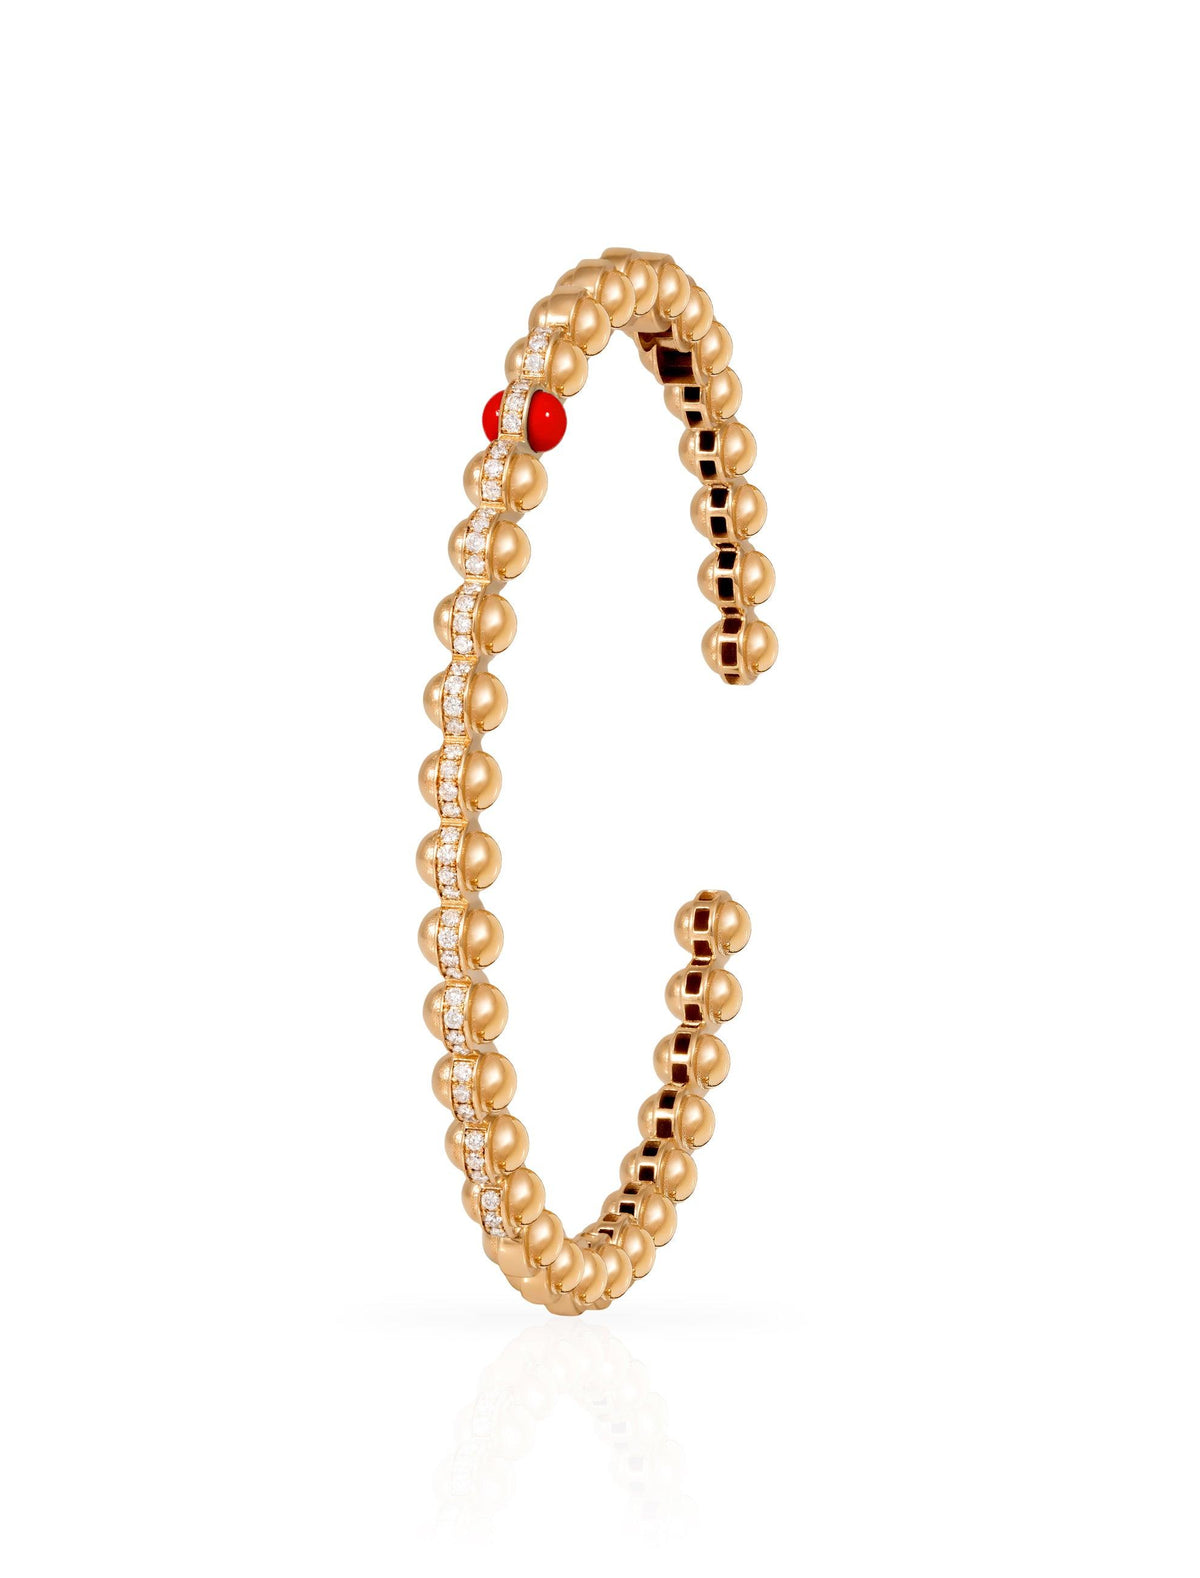 The Rubidium Gold Bangle by L'Atelier Nawbar (Size 1 - Red) - Tales of Stones